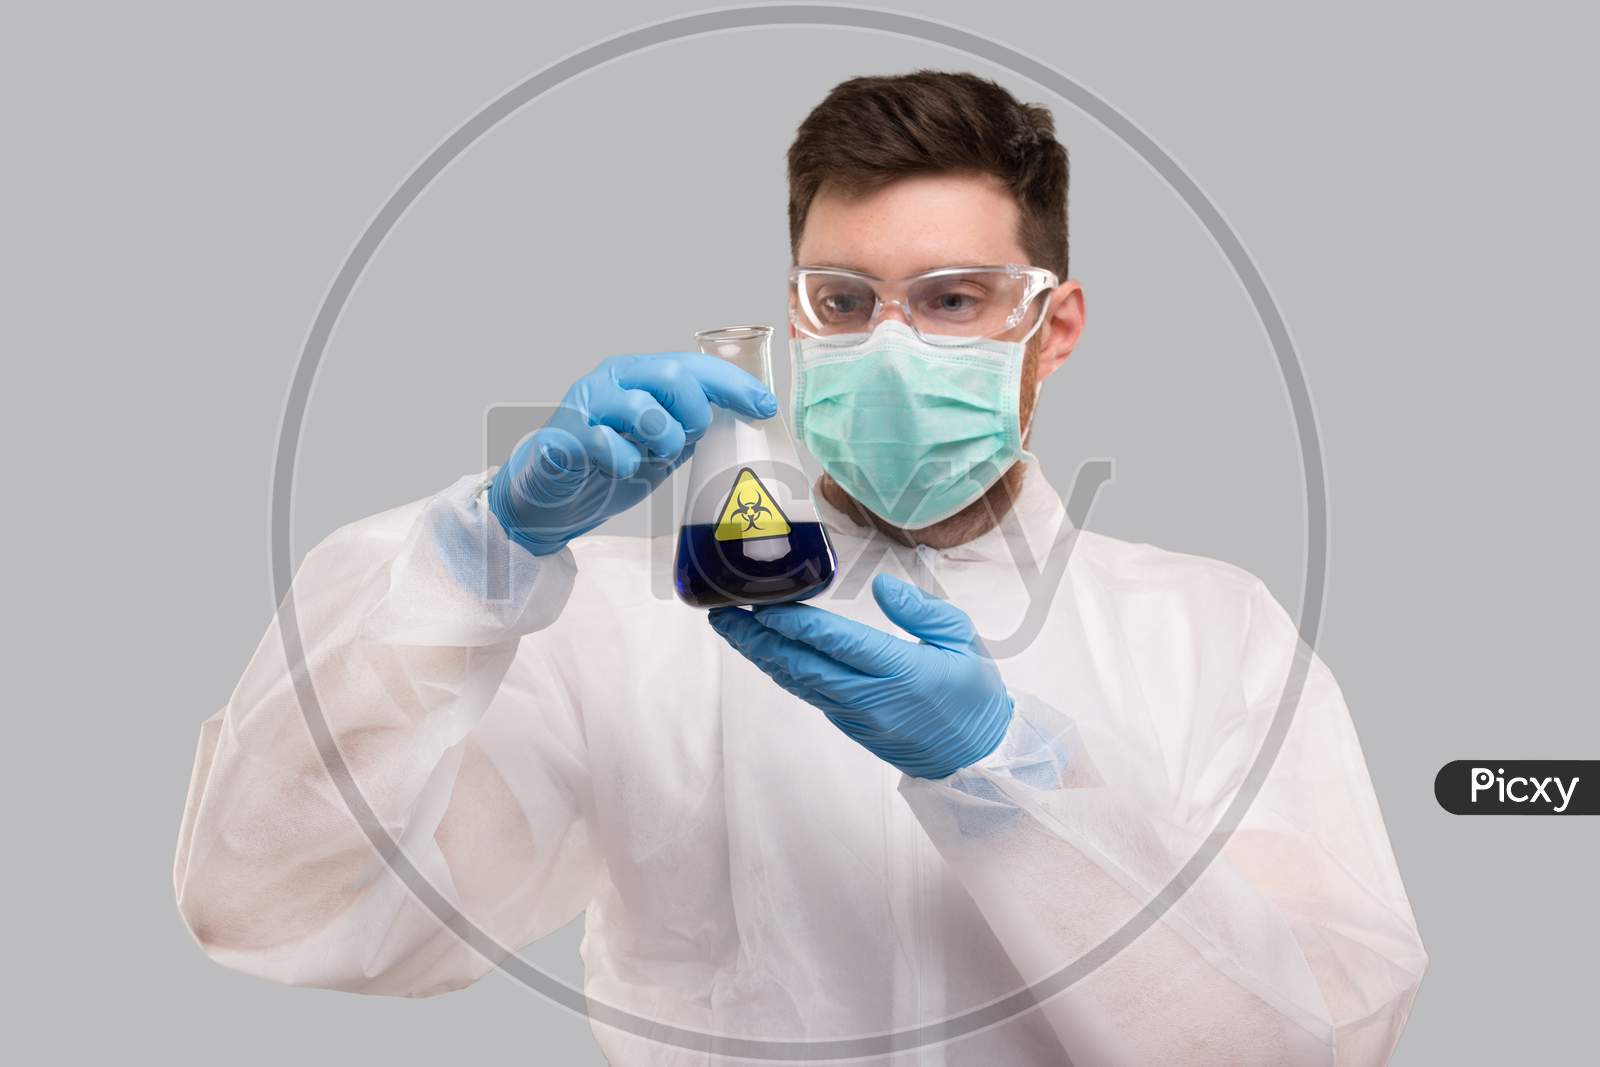 Male Laboratory Worker In Chemical Suit, Wearing Medical Mask And Glasses Watching Flask With Blue Liquid Biohazard Sign. Science, Medical, Virus Concept. Blue Liquid